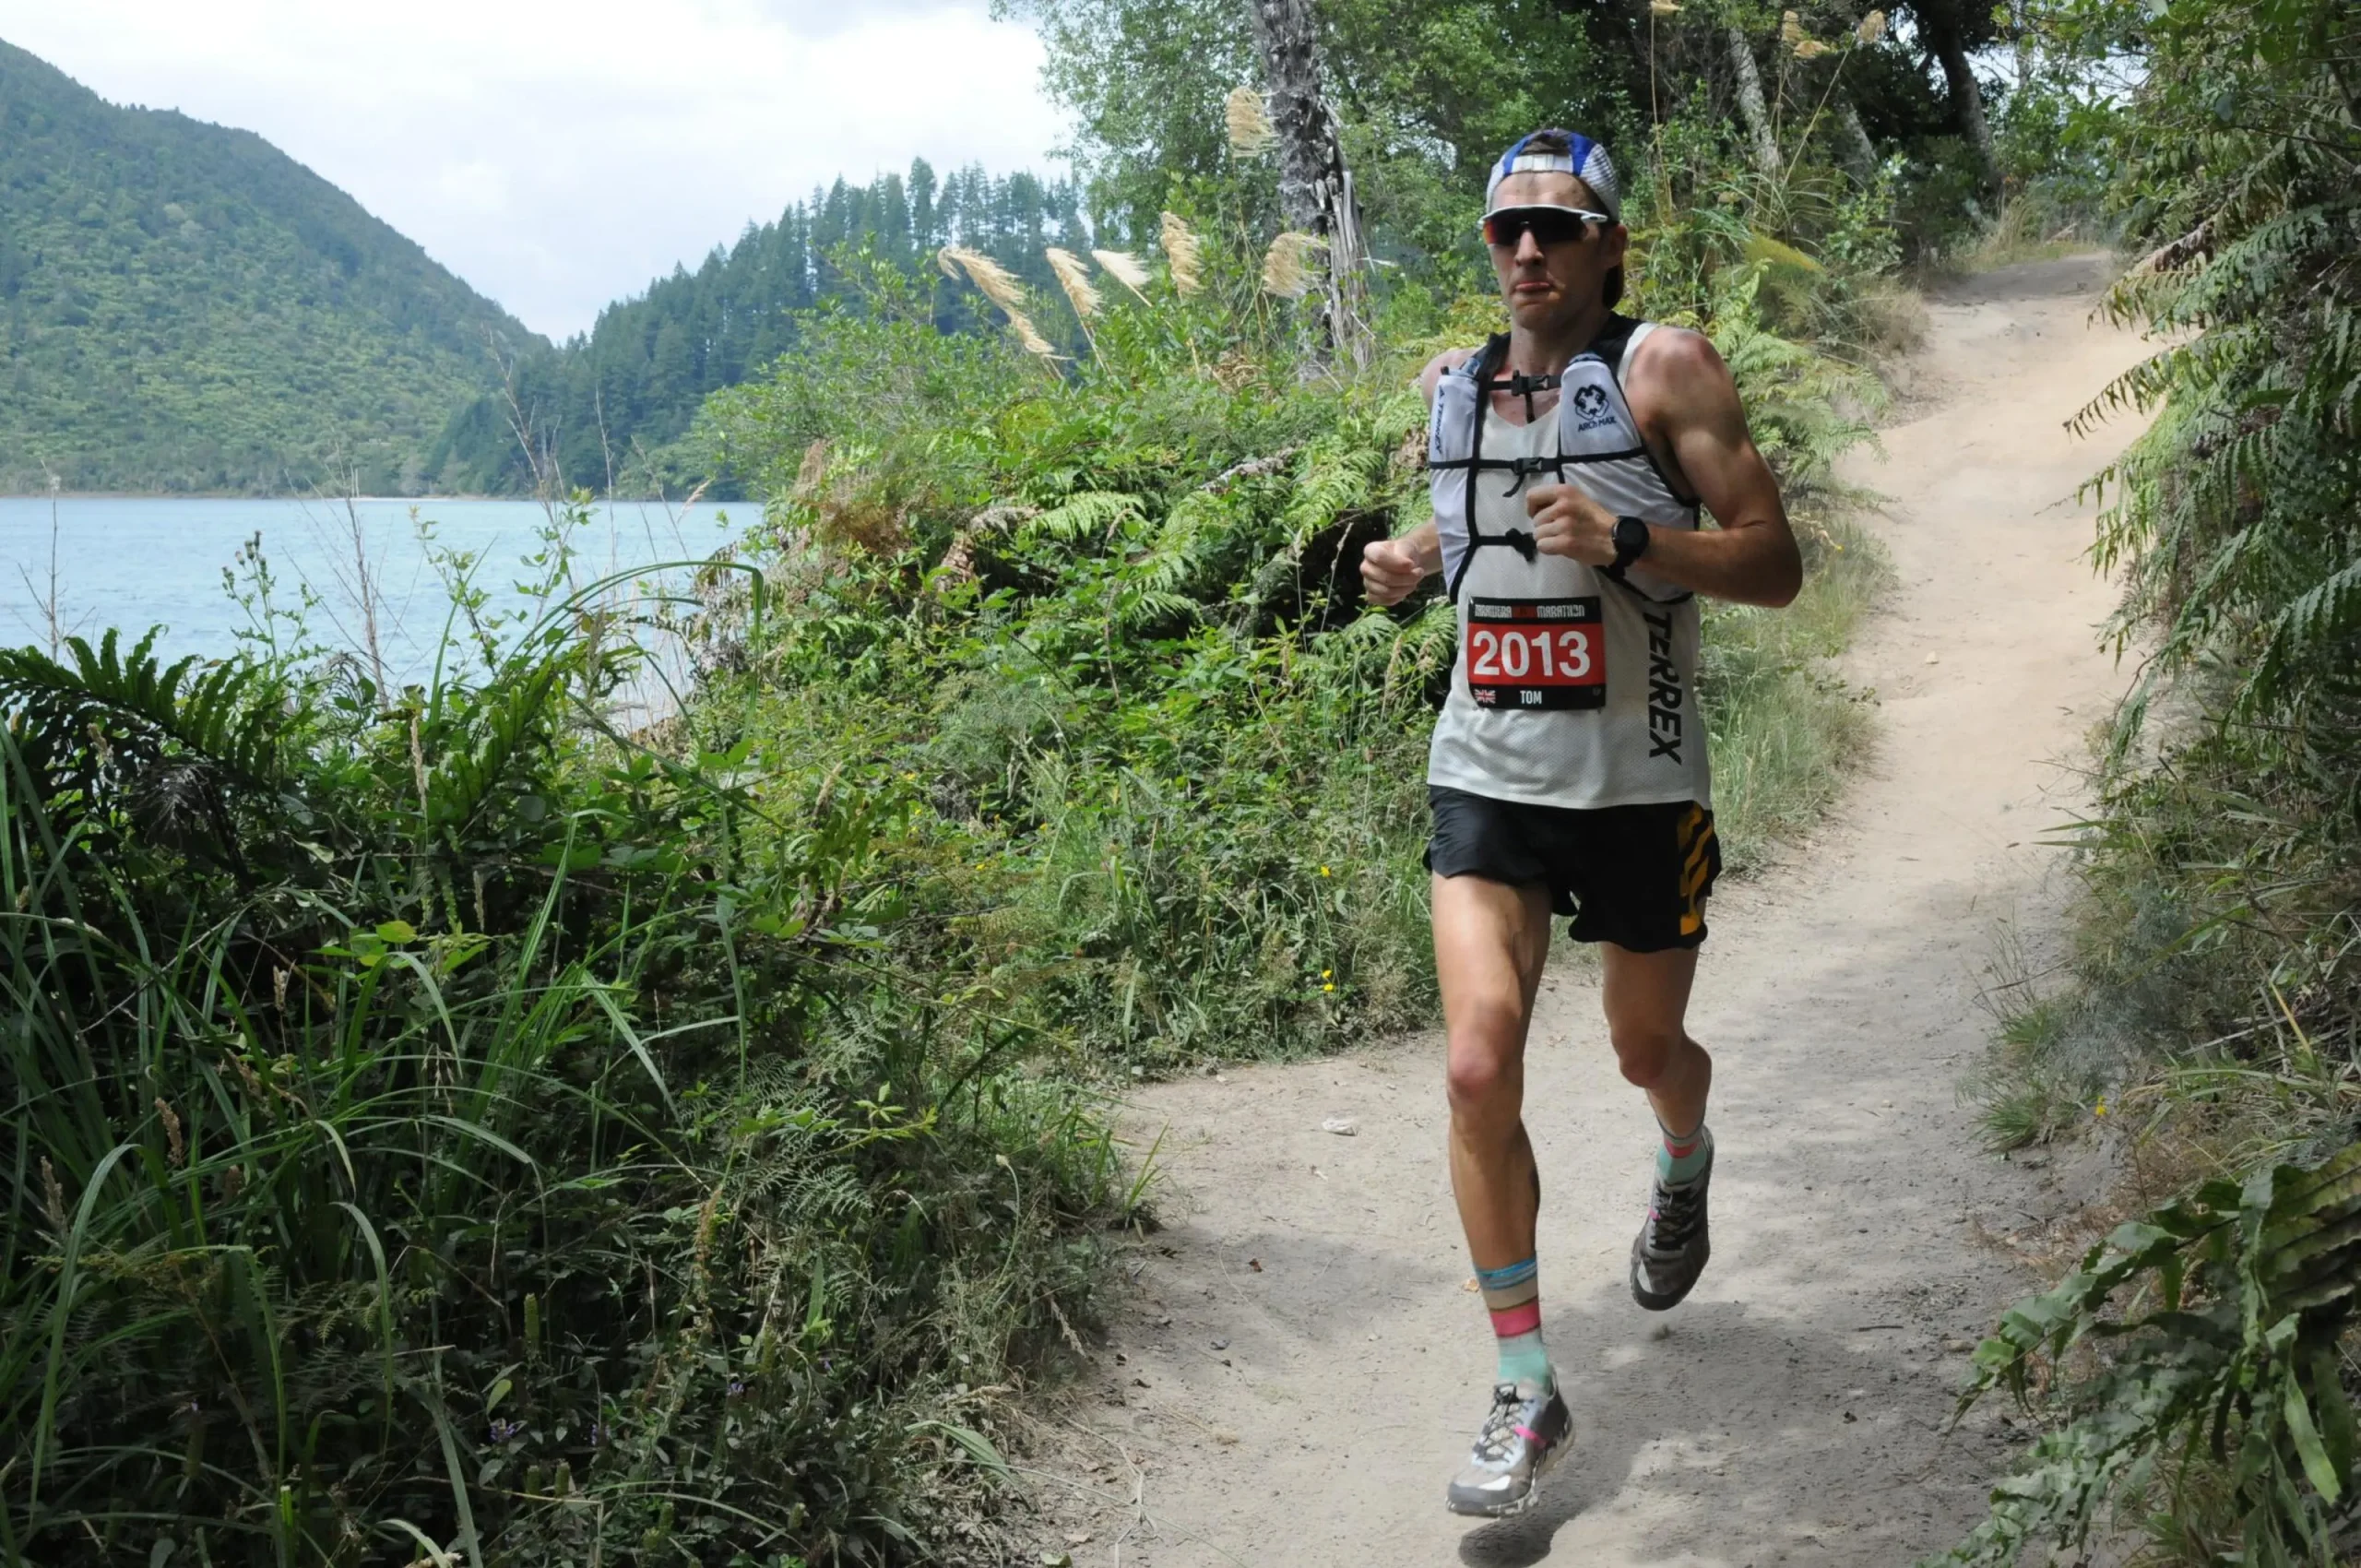 Ultrarunning: Ultra race training tips with Tom Evans